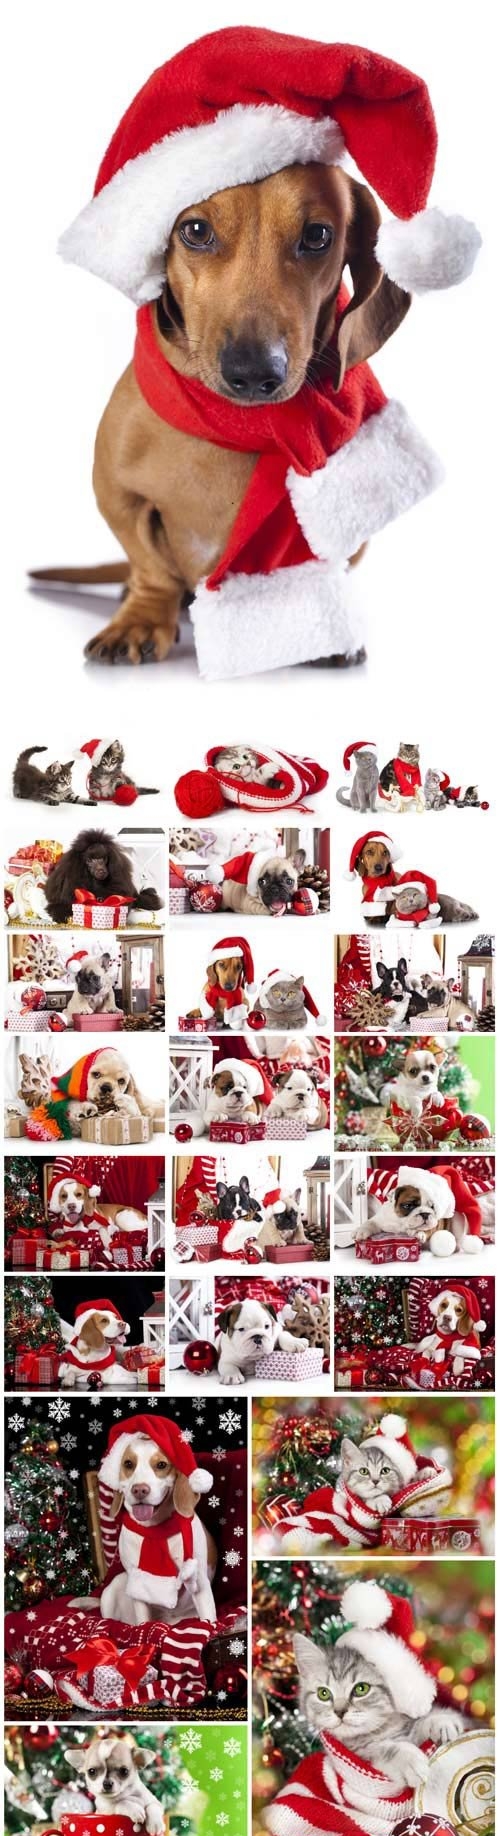 New Year and Christmas stock photos - 19